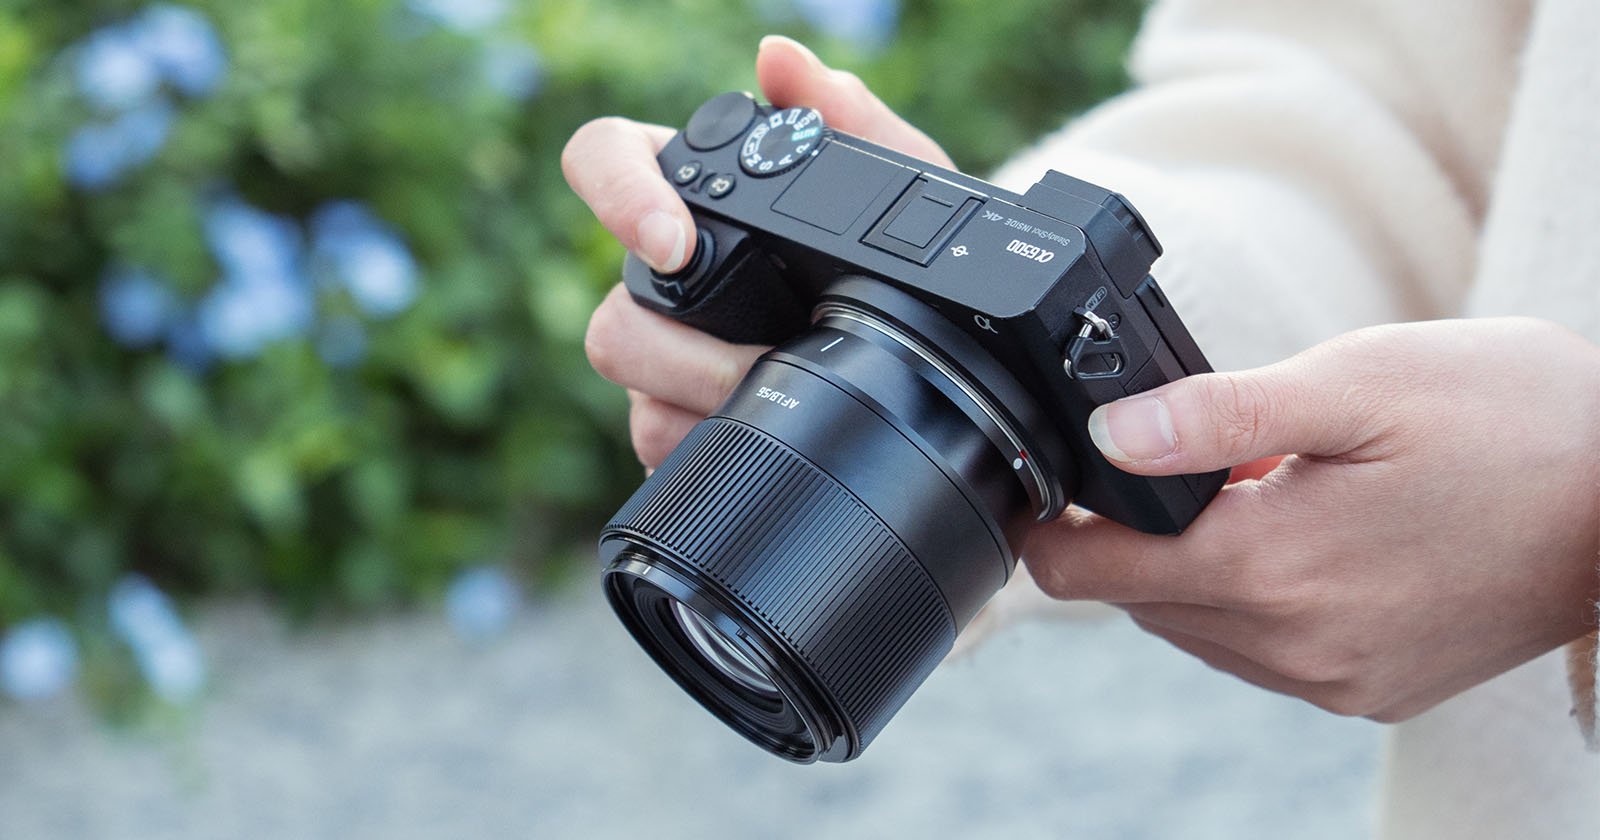 A person holding a black dslr camera, adjusting settings with their right hand, against a blurred green foliage background.